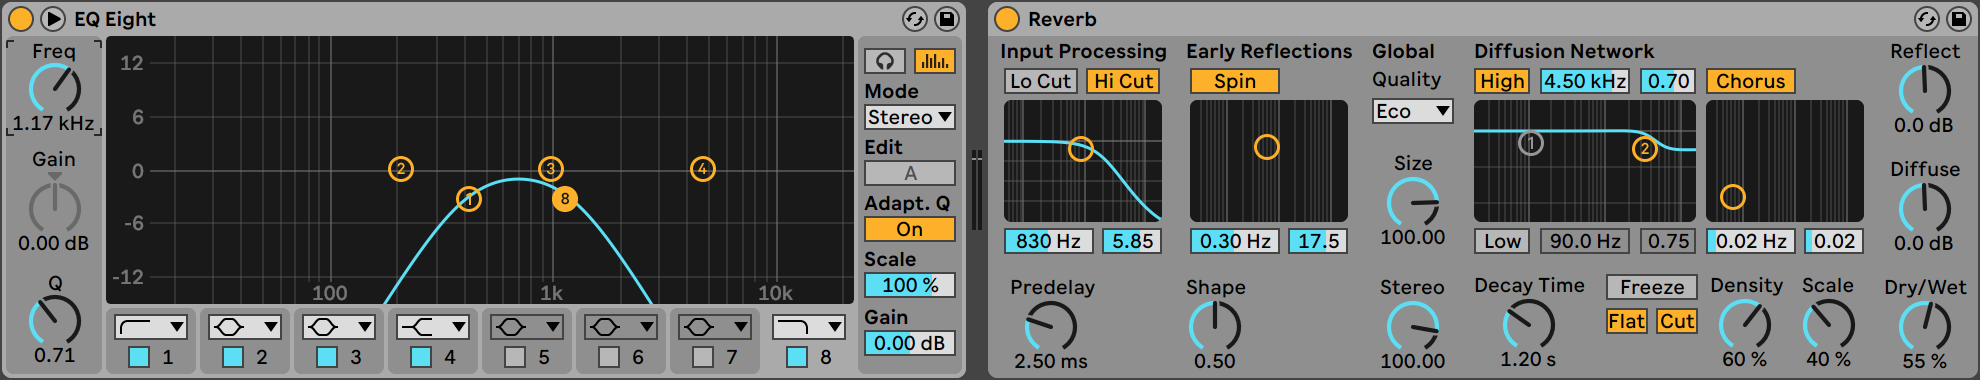 7 Essential Tips for Reverb_1.1.png